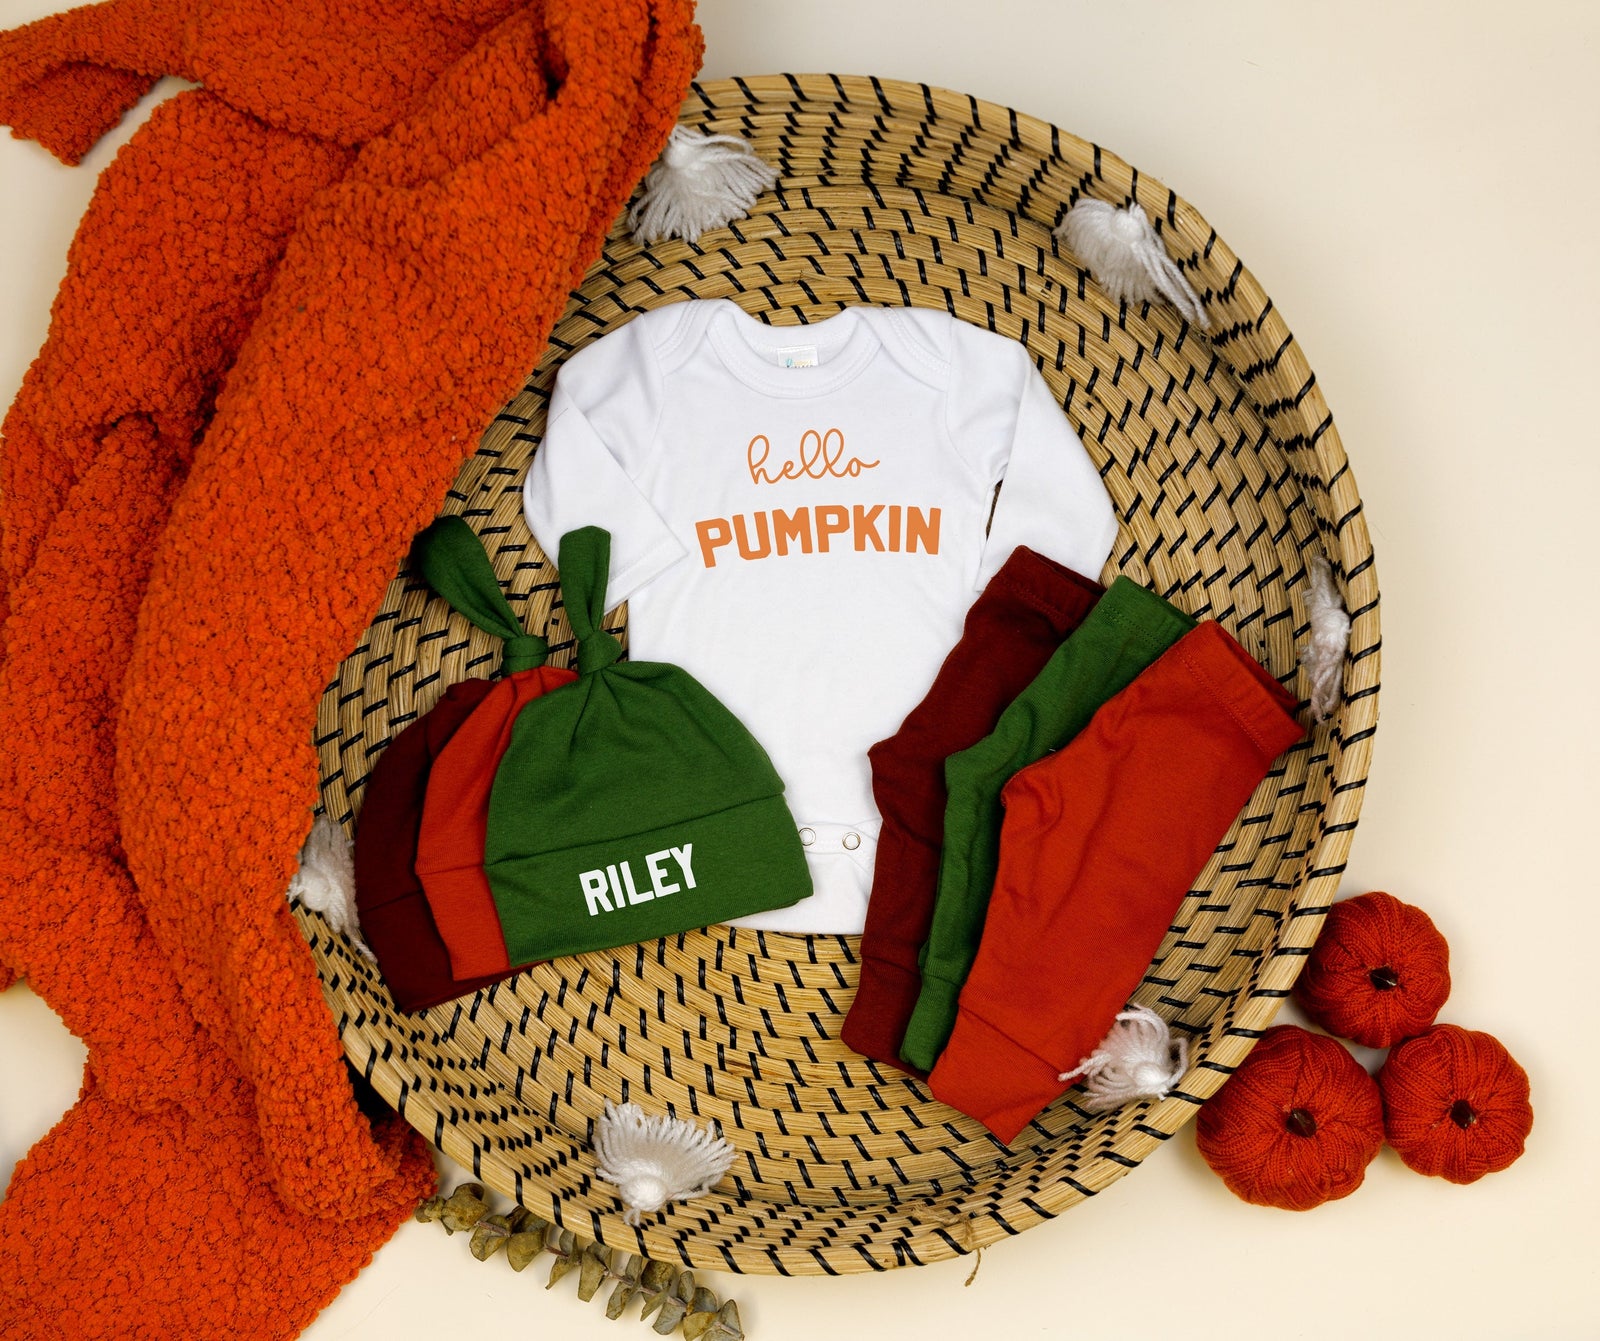 Cutest Pumpkin in the Patch Outfit Bundle - Cuddle Sleep Dream